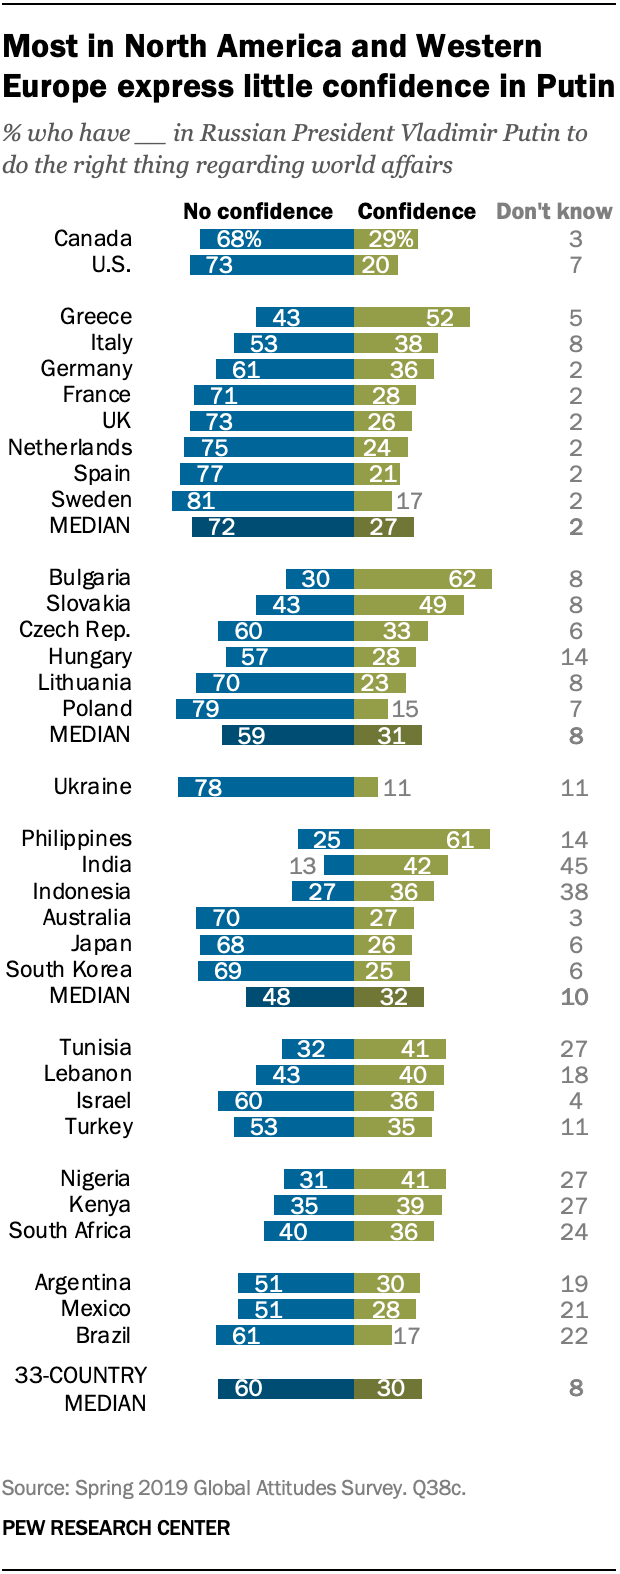 Most in North America and Western Europe express little confidence in Putin